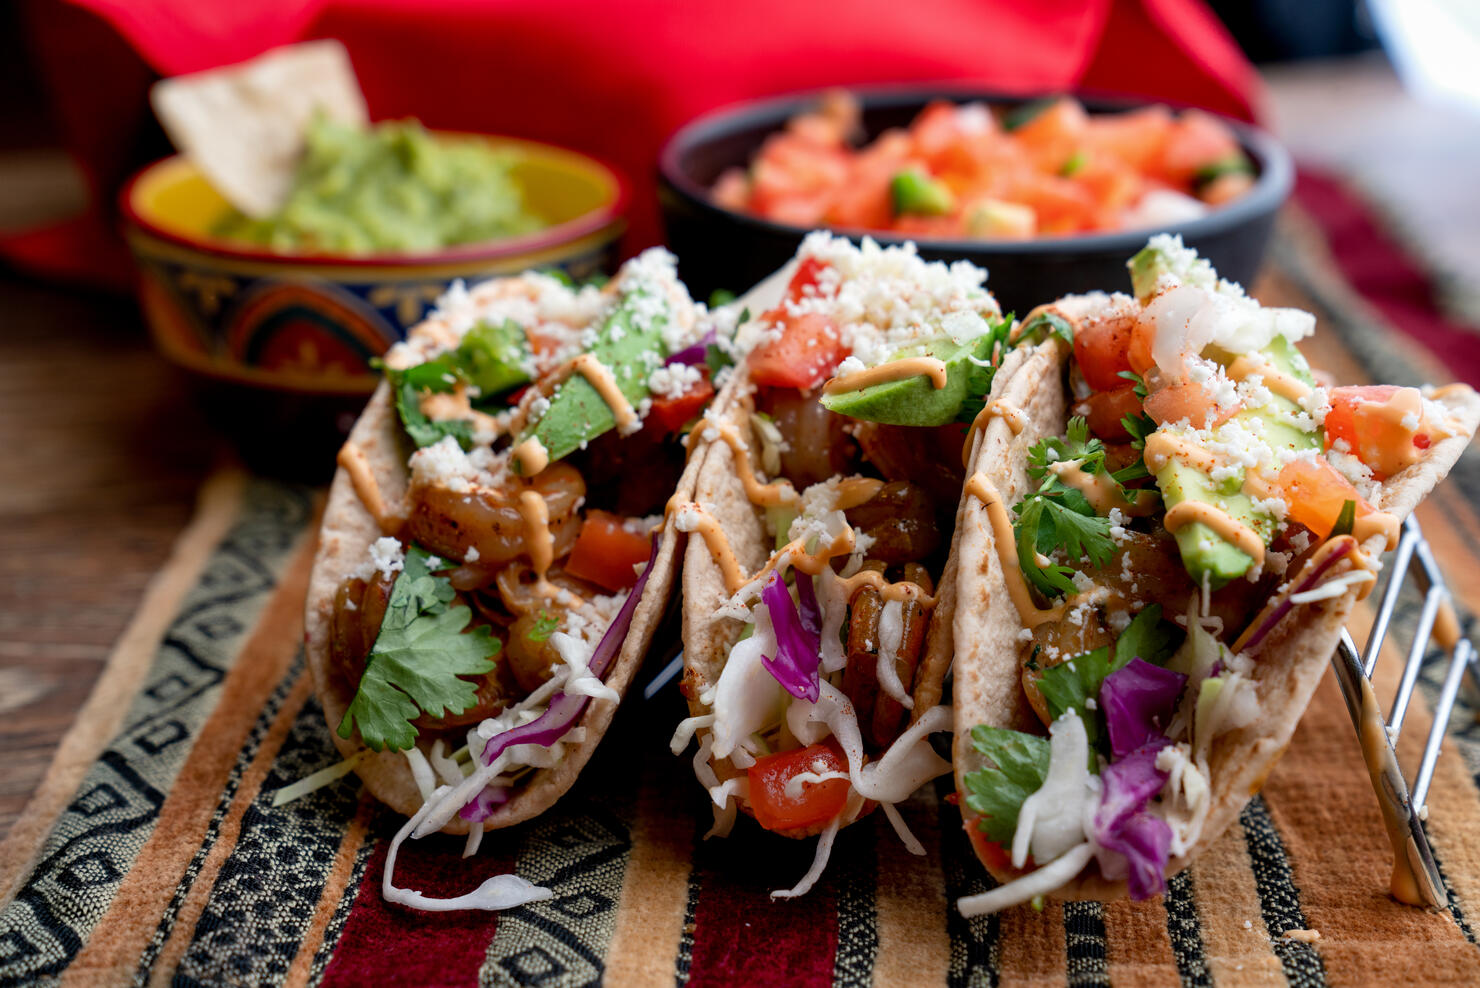 Colorful Street Tacos, Shrimp - Seafood, Fish, Grilled, Ready-To-Eat